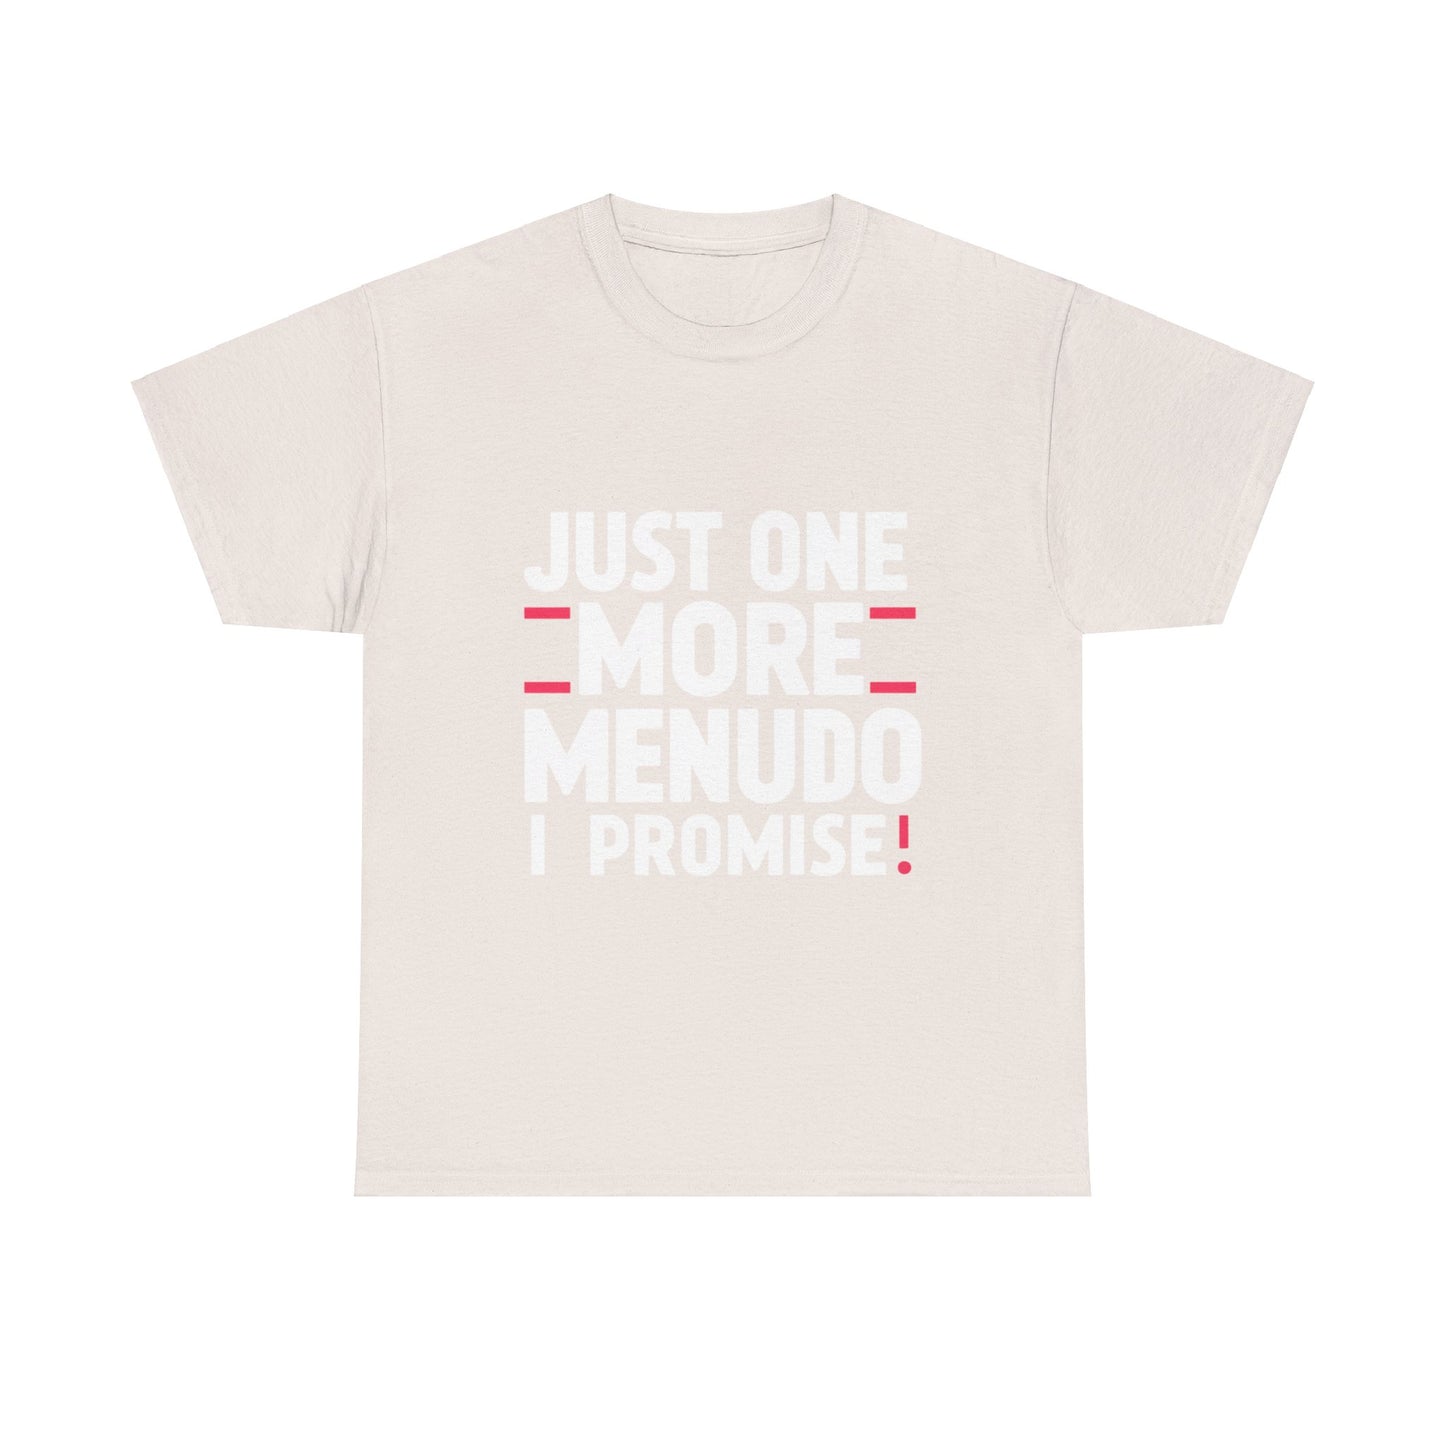 Just One More Menudo I Promise Mexican Food Graphic Unisex Heavy Cotton Tee Cotton Funny Humorous Graphic Soft Premium Unisex Men Women Ice Gray T-shirt Birthday Gift-12